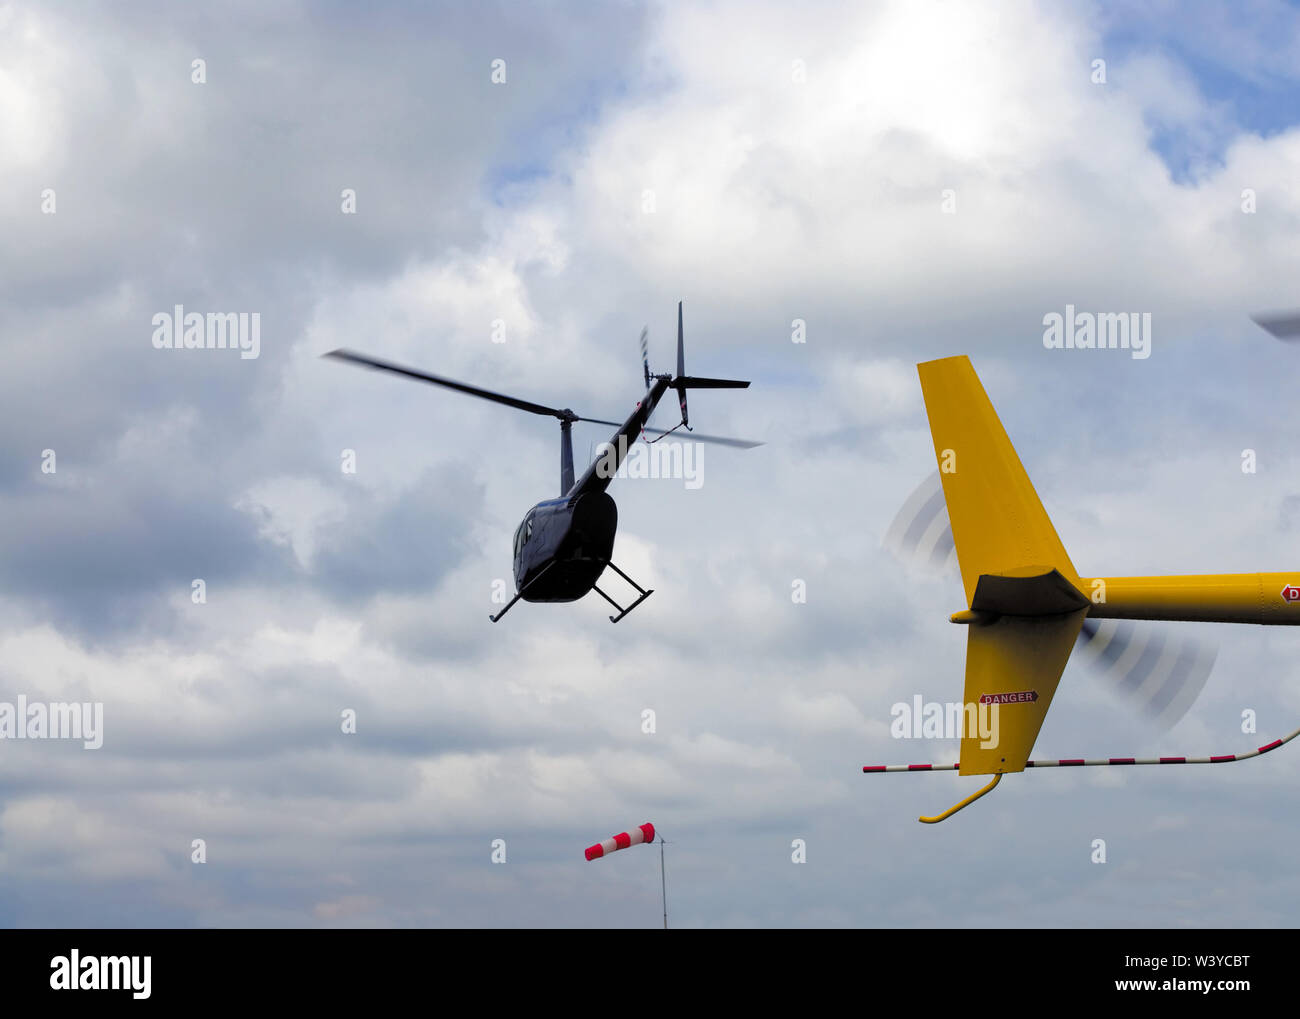 Small helicopter against cloudy sky Stock Photo